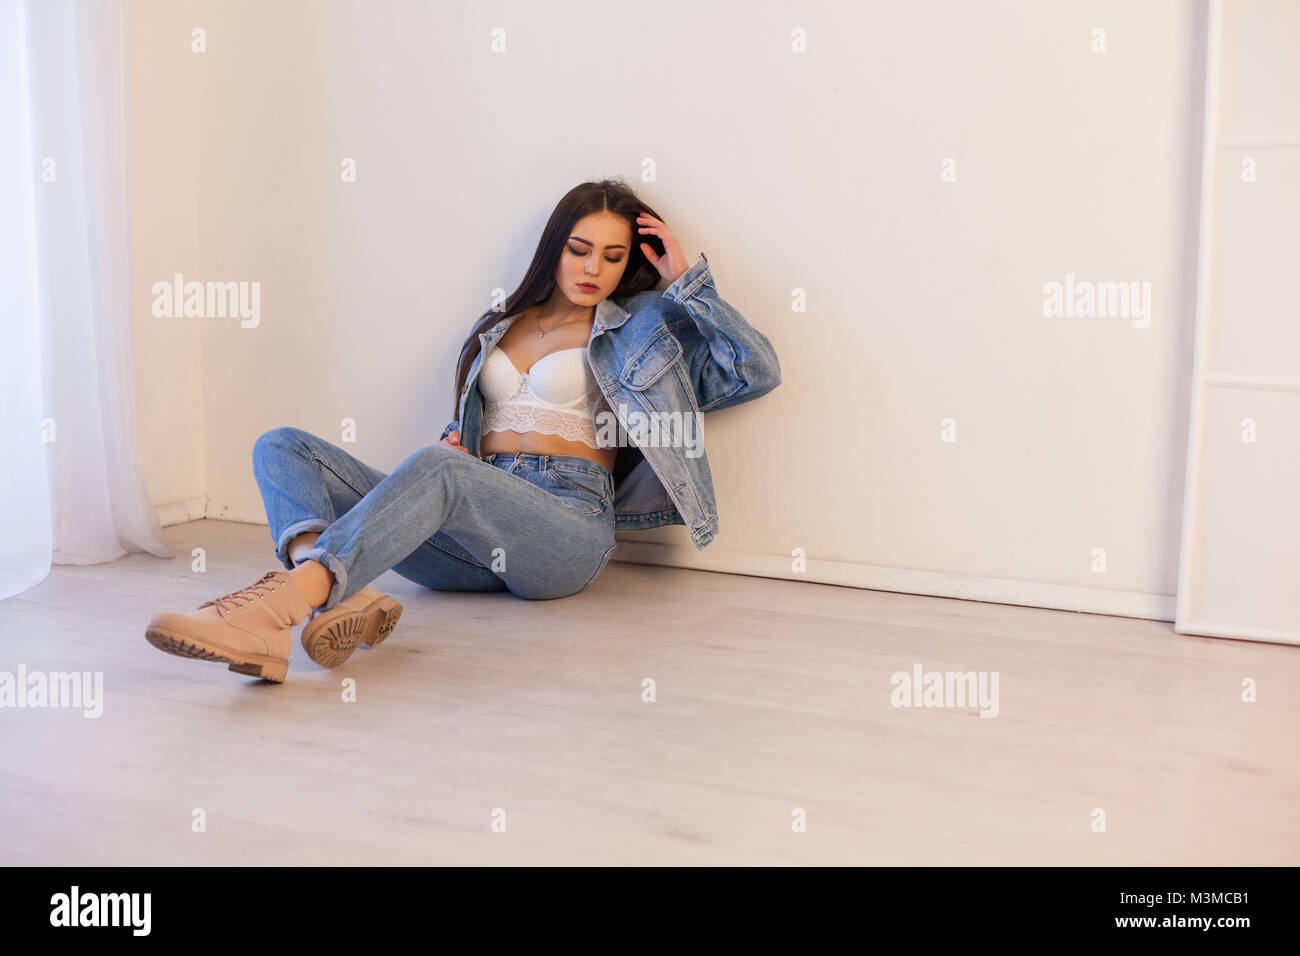 Beautiful Japanese Girl In Jeans High Resolution Stock Photography and  Images - Alamy